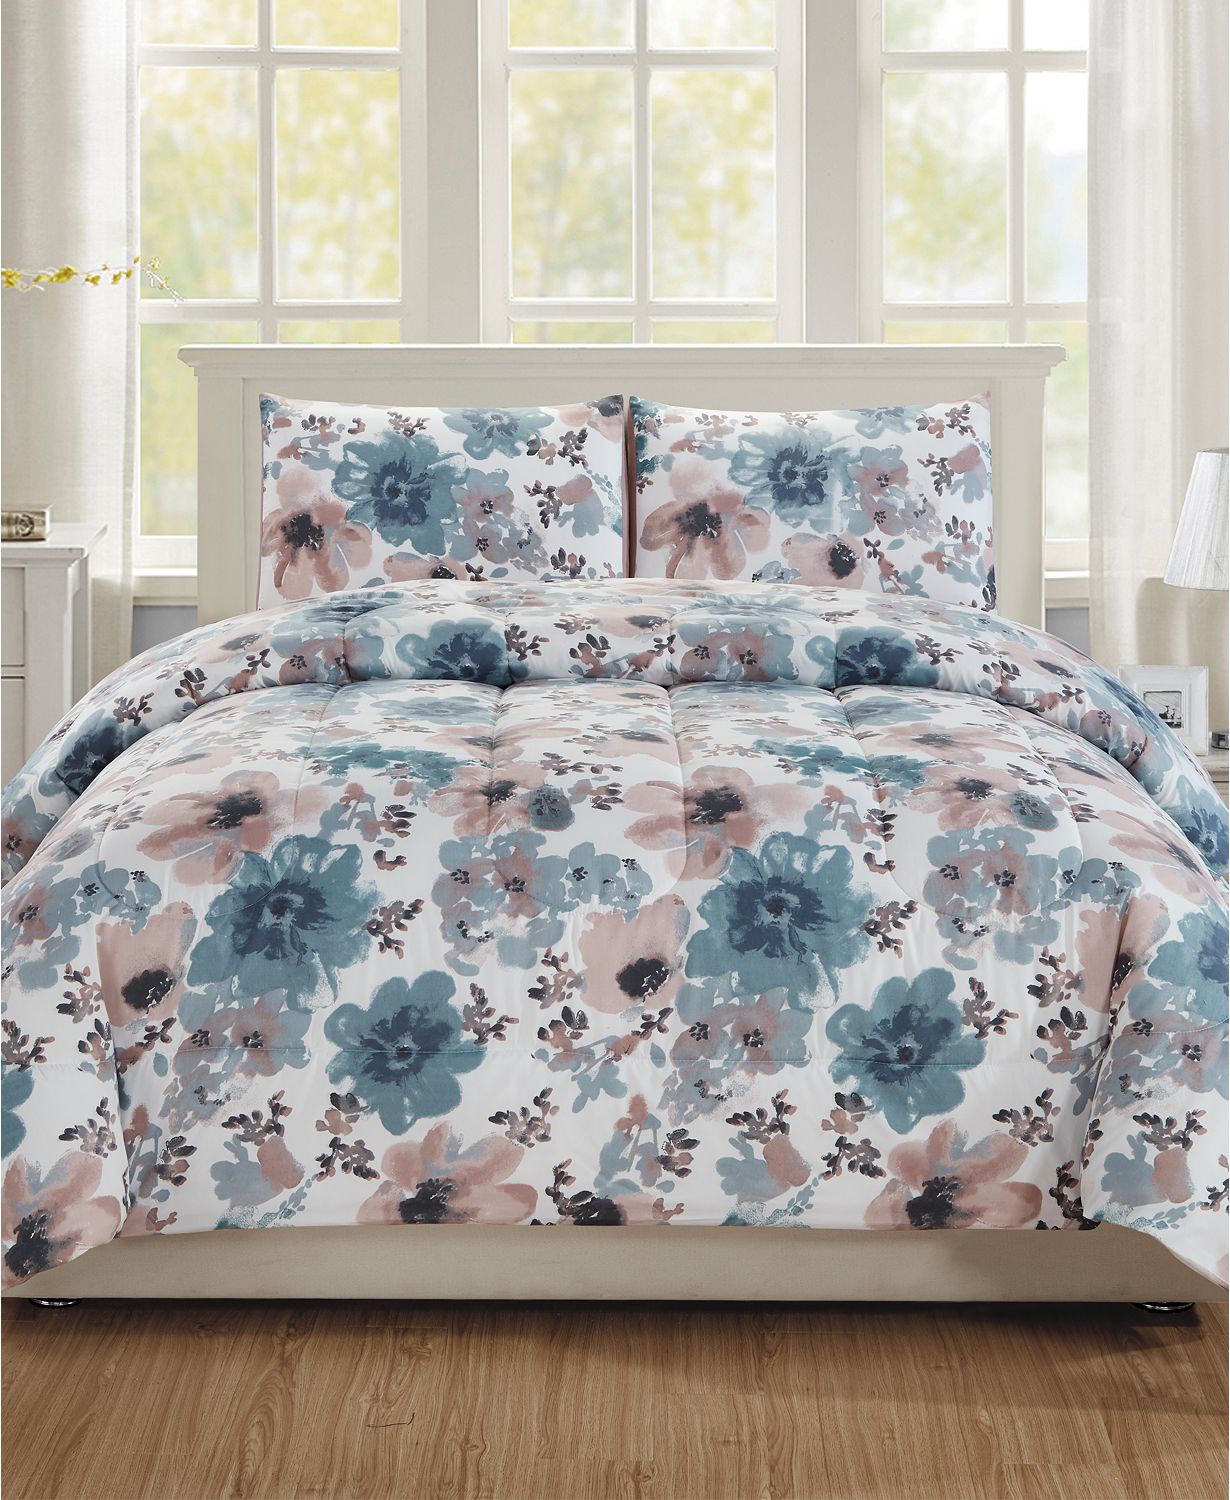 You Can Get 3-Piece Comforter Sets For Just $19.99 At Macy's